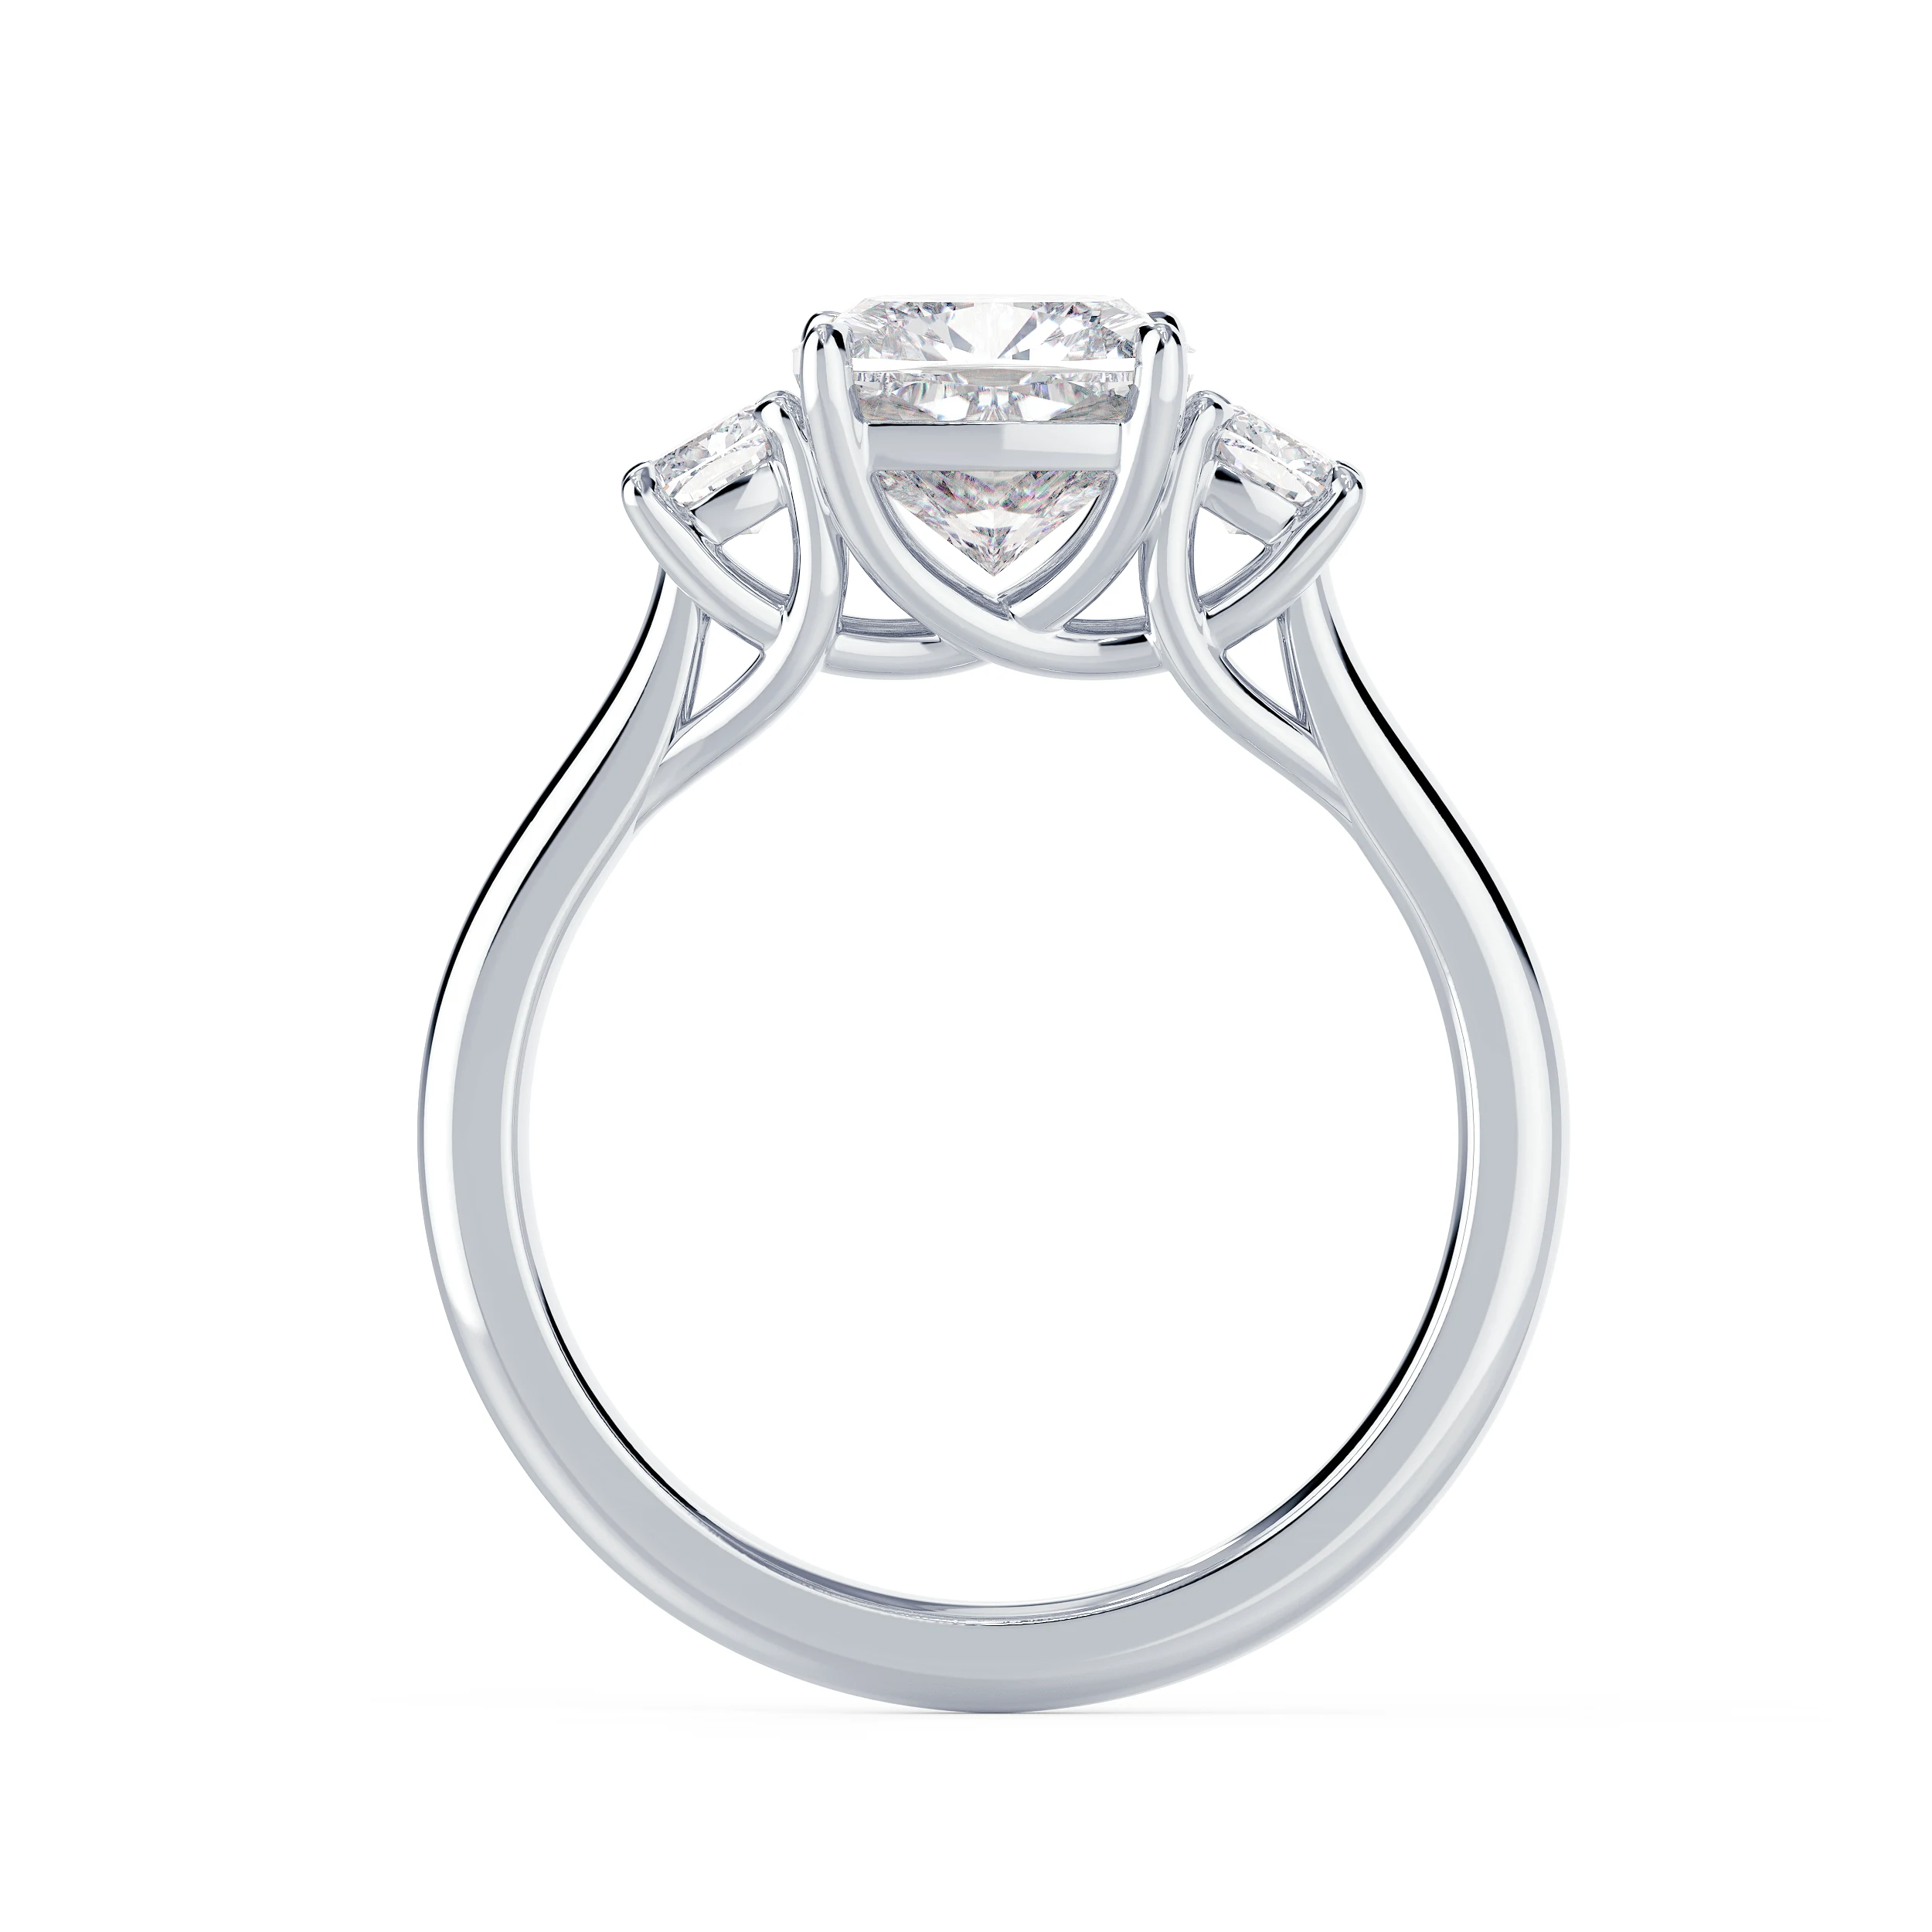 White Gold Cushion Three Stone Setting featuring Exceptional Quality 2.0 ct Diamonds (Profile View)